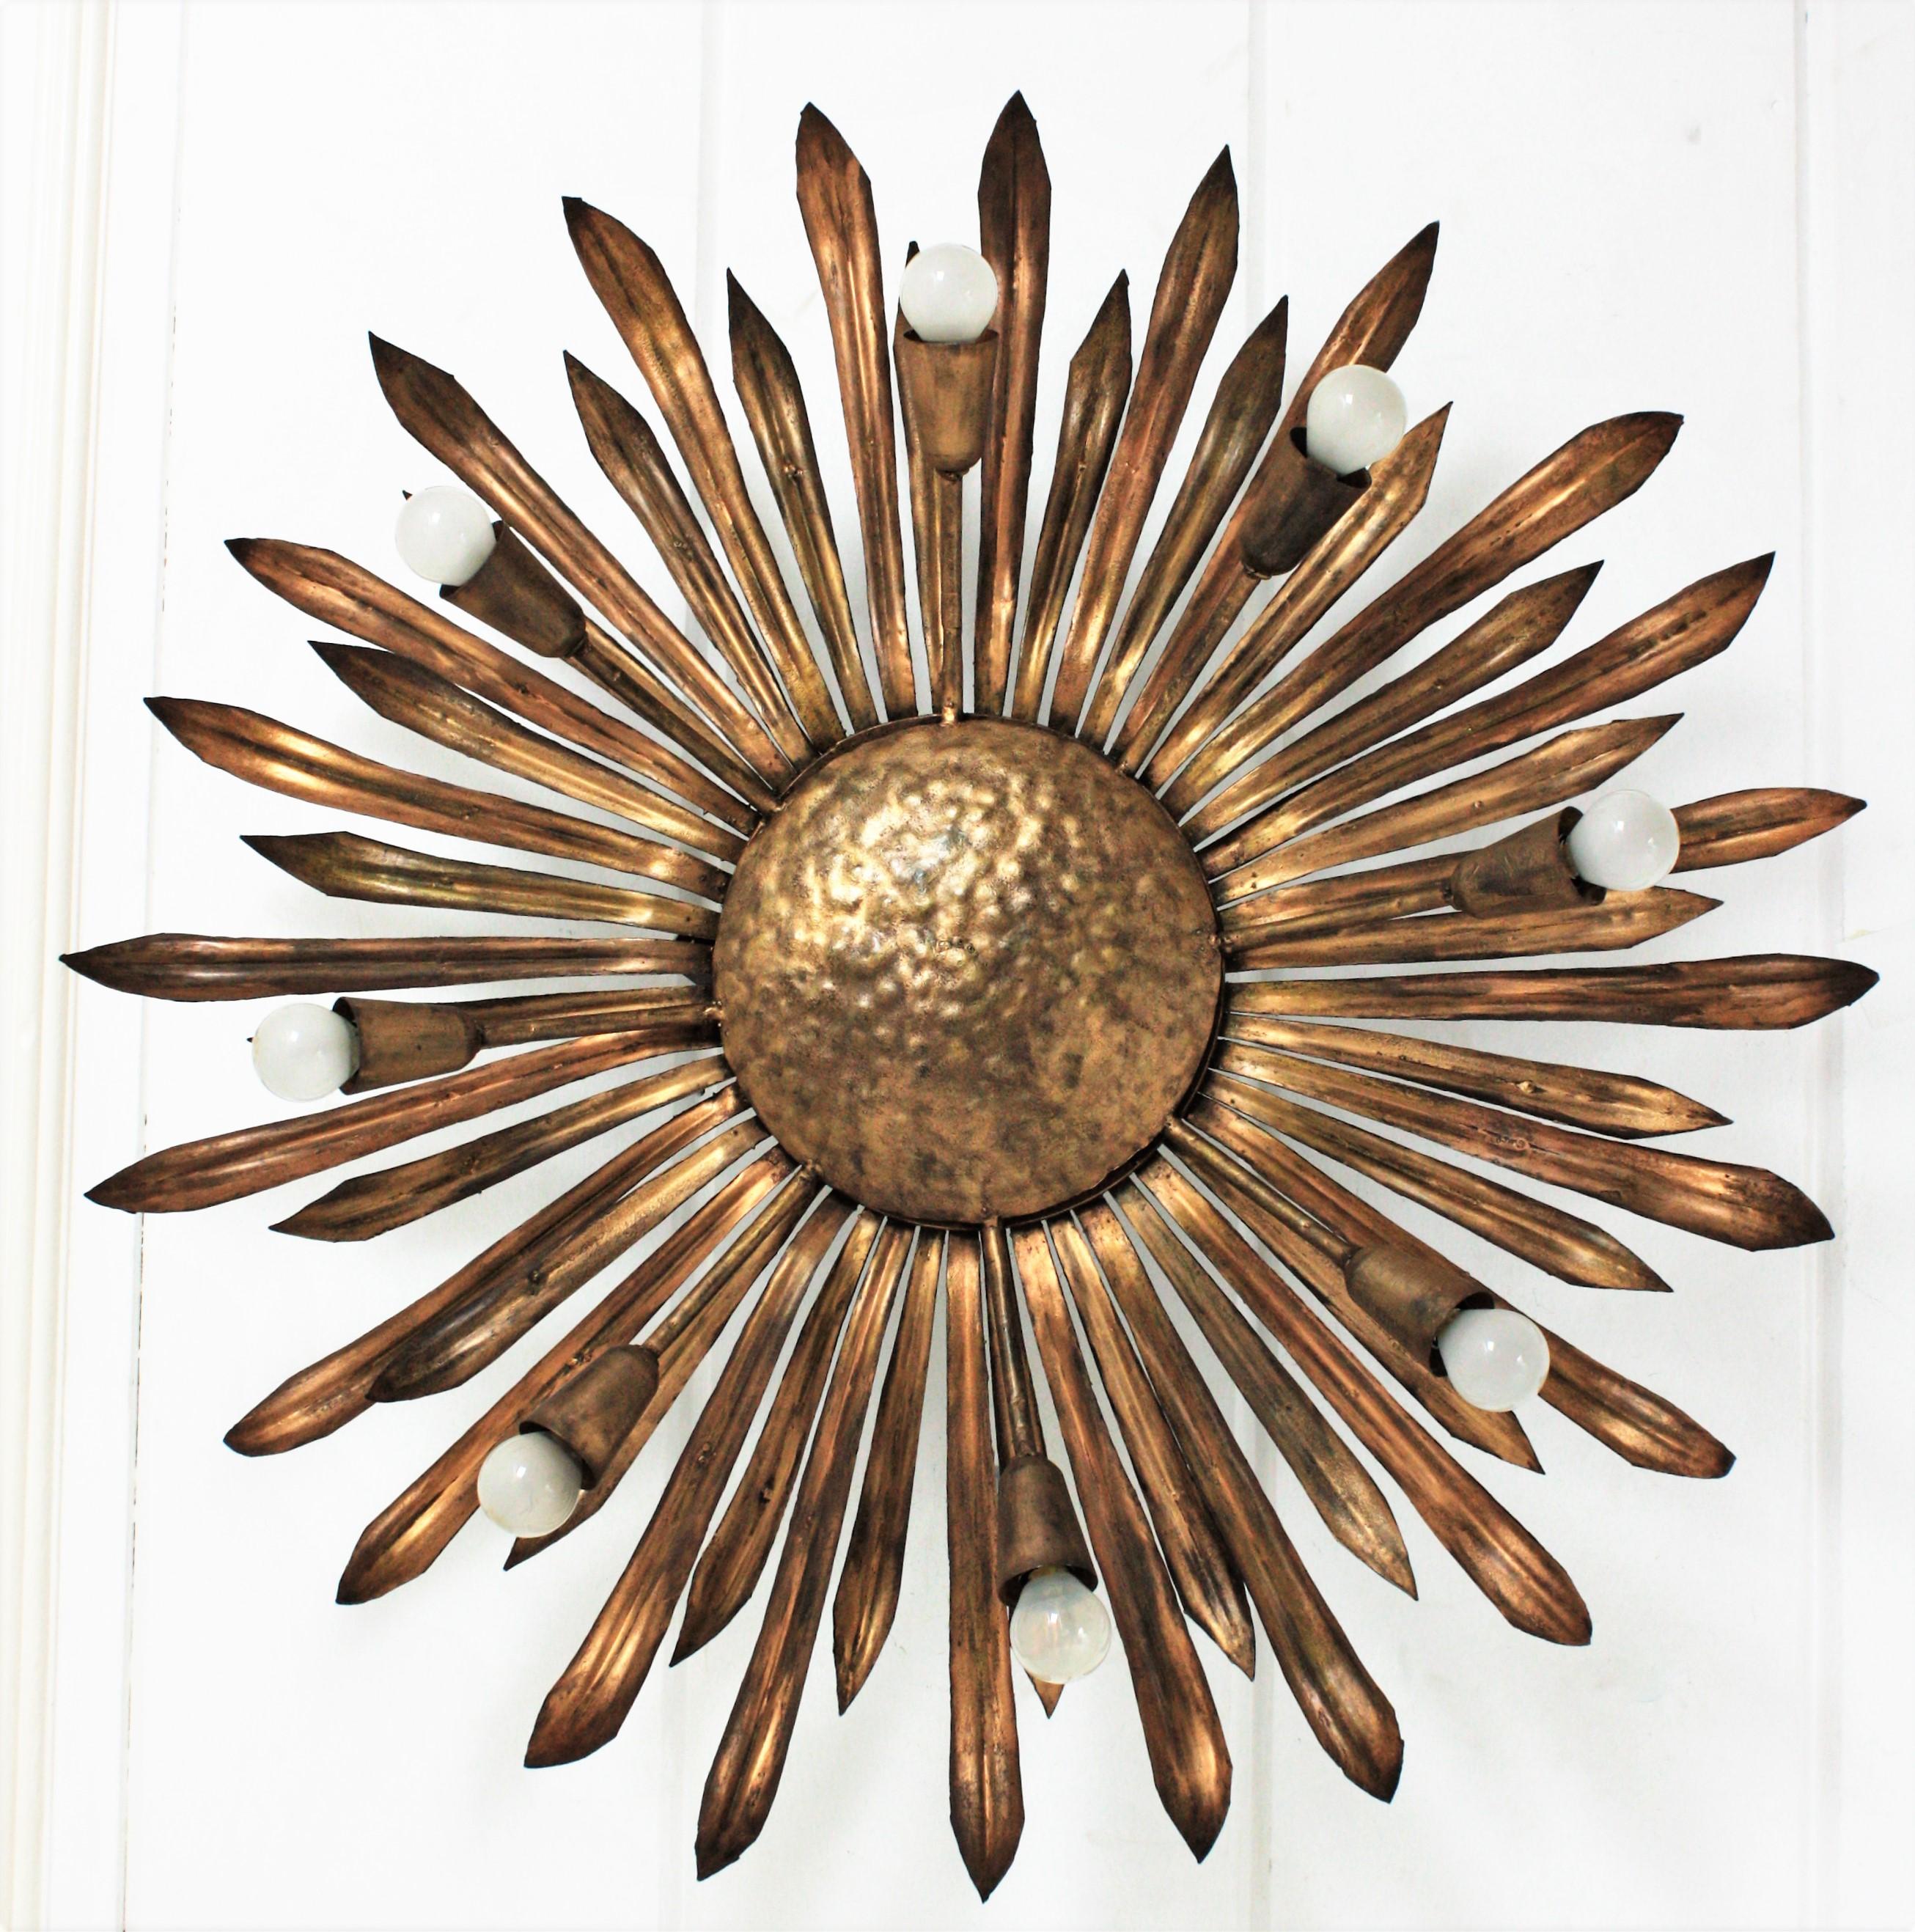 Sunburst leafed Flush Mount / chandelier in Gilt Iron. Spain, 1960s
Outstanding eight-light gilt metal sunburst or floral ceiling light fixture with alternating petals or leaves. Gilt patinated finish in bronze and golden tones.
Manufactured at